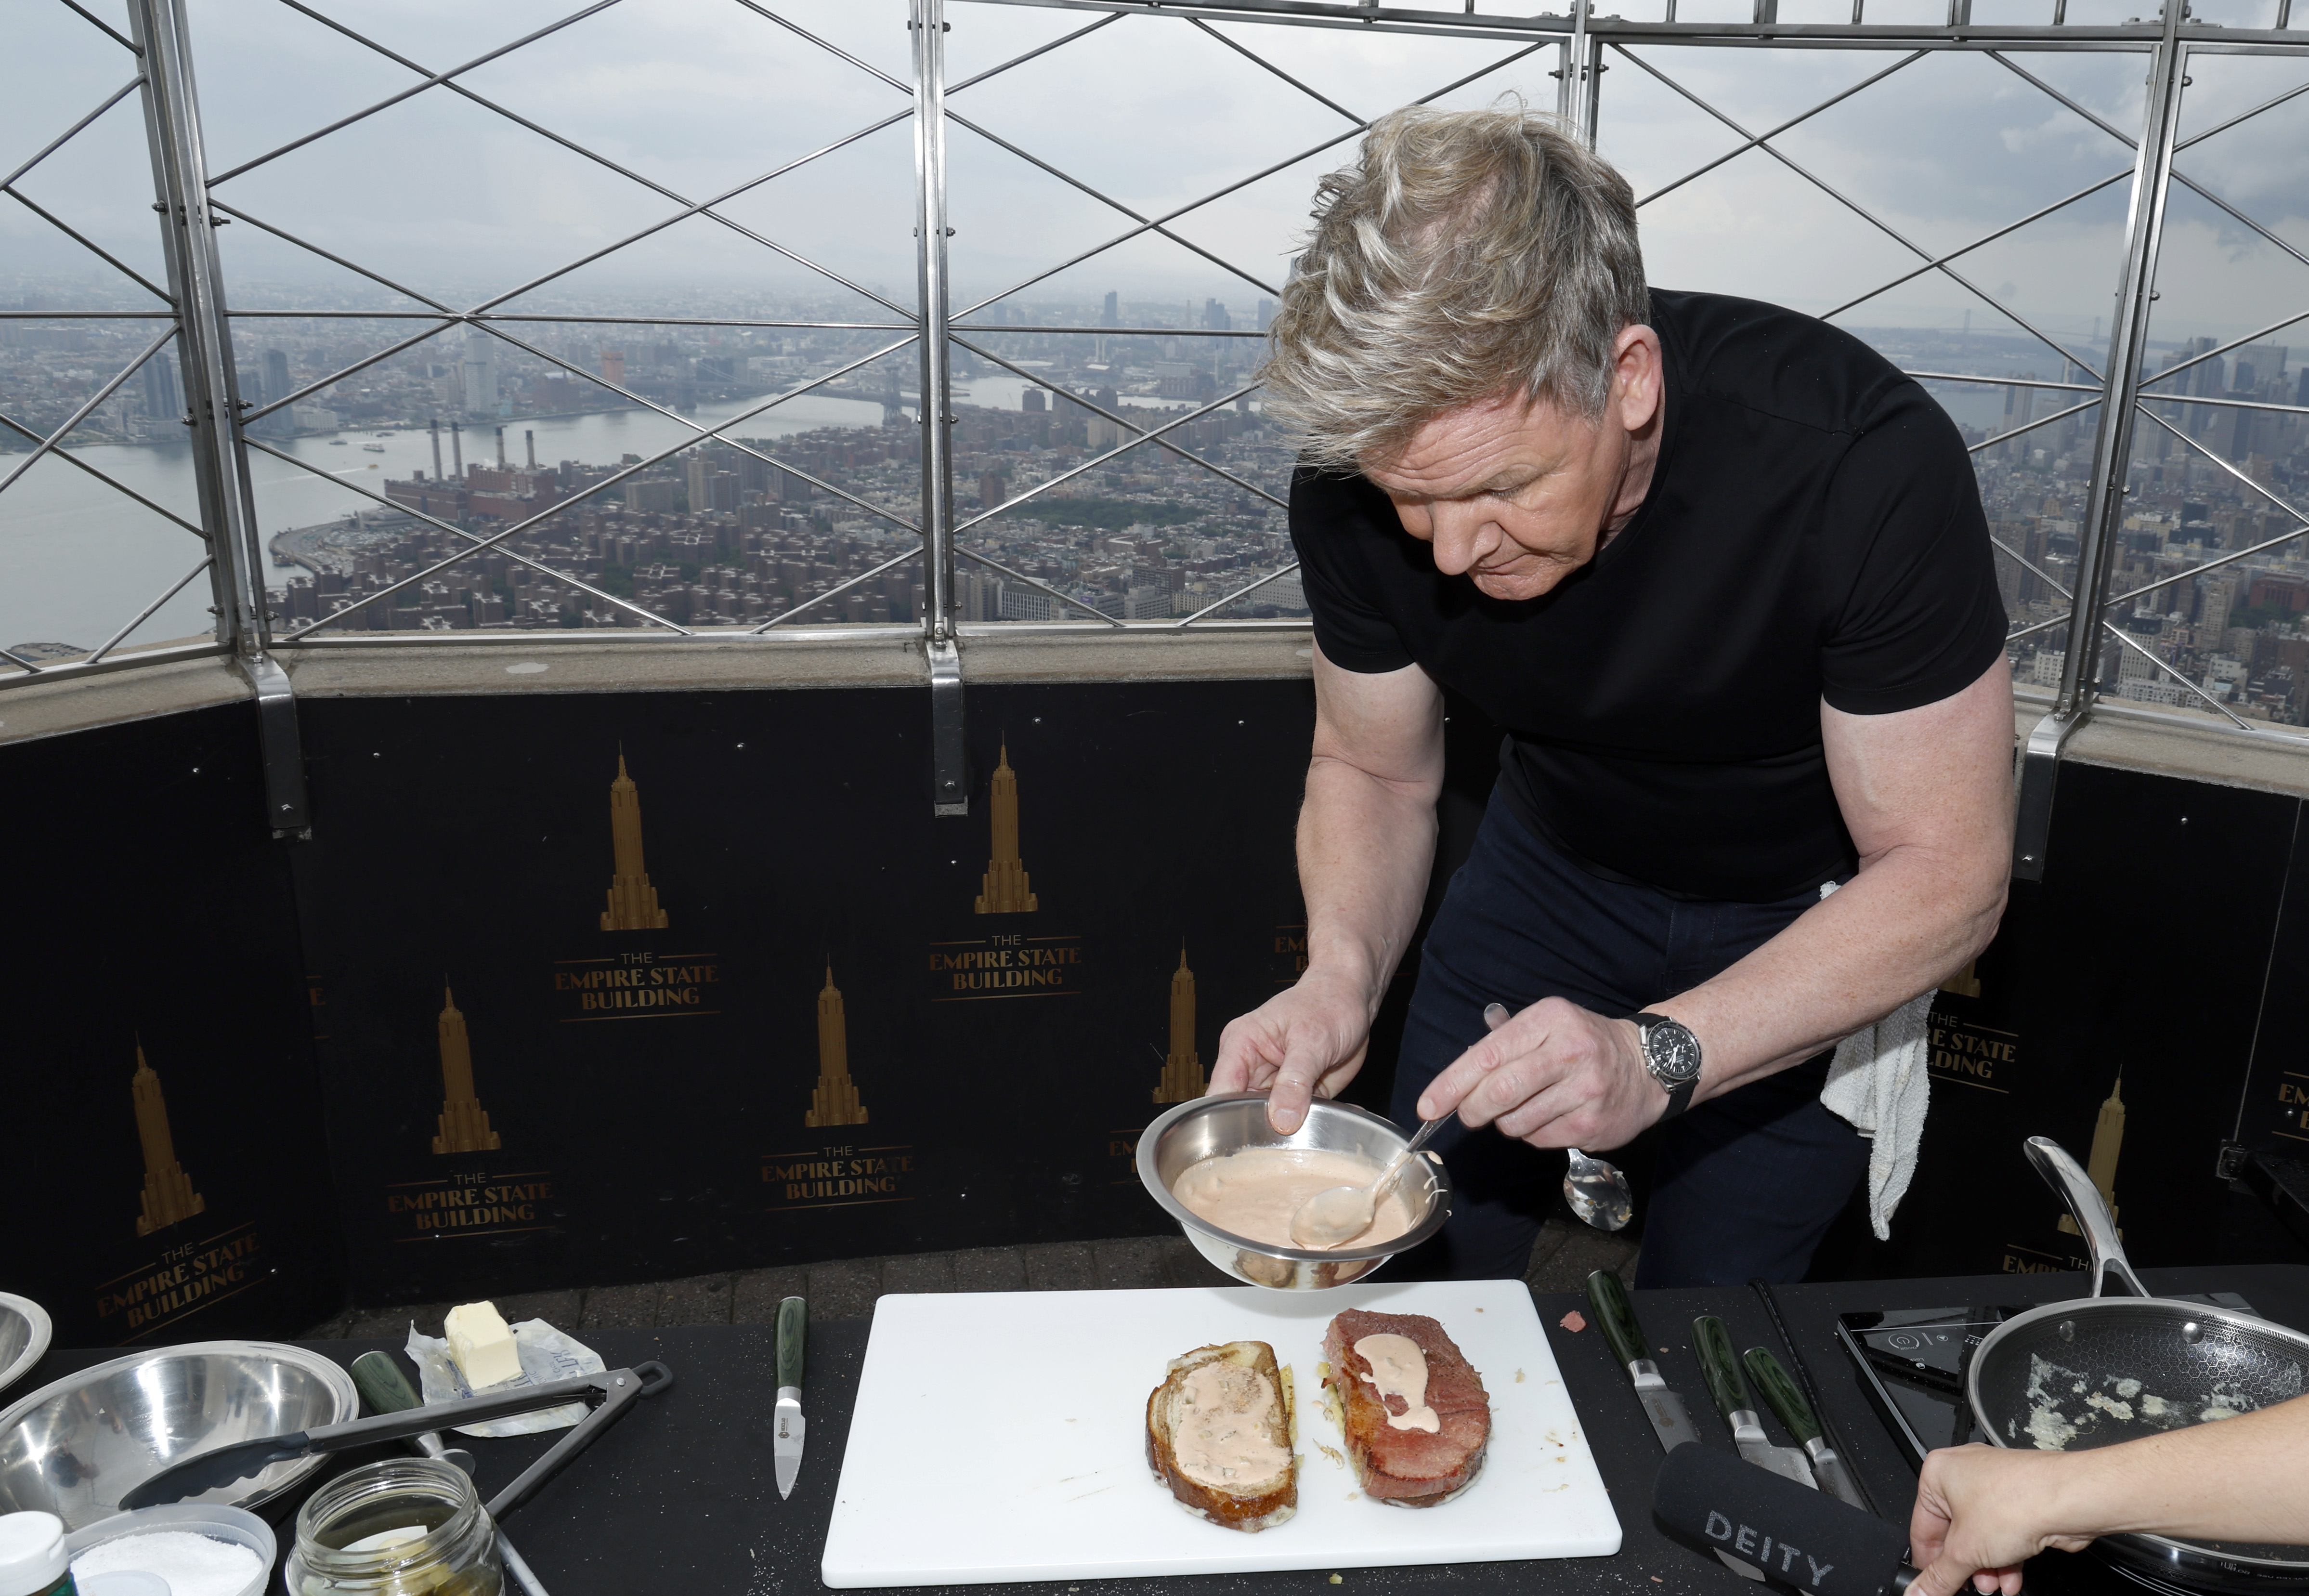 Gordon Ramsay makes a Reuben sandwich at the Empire State Building